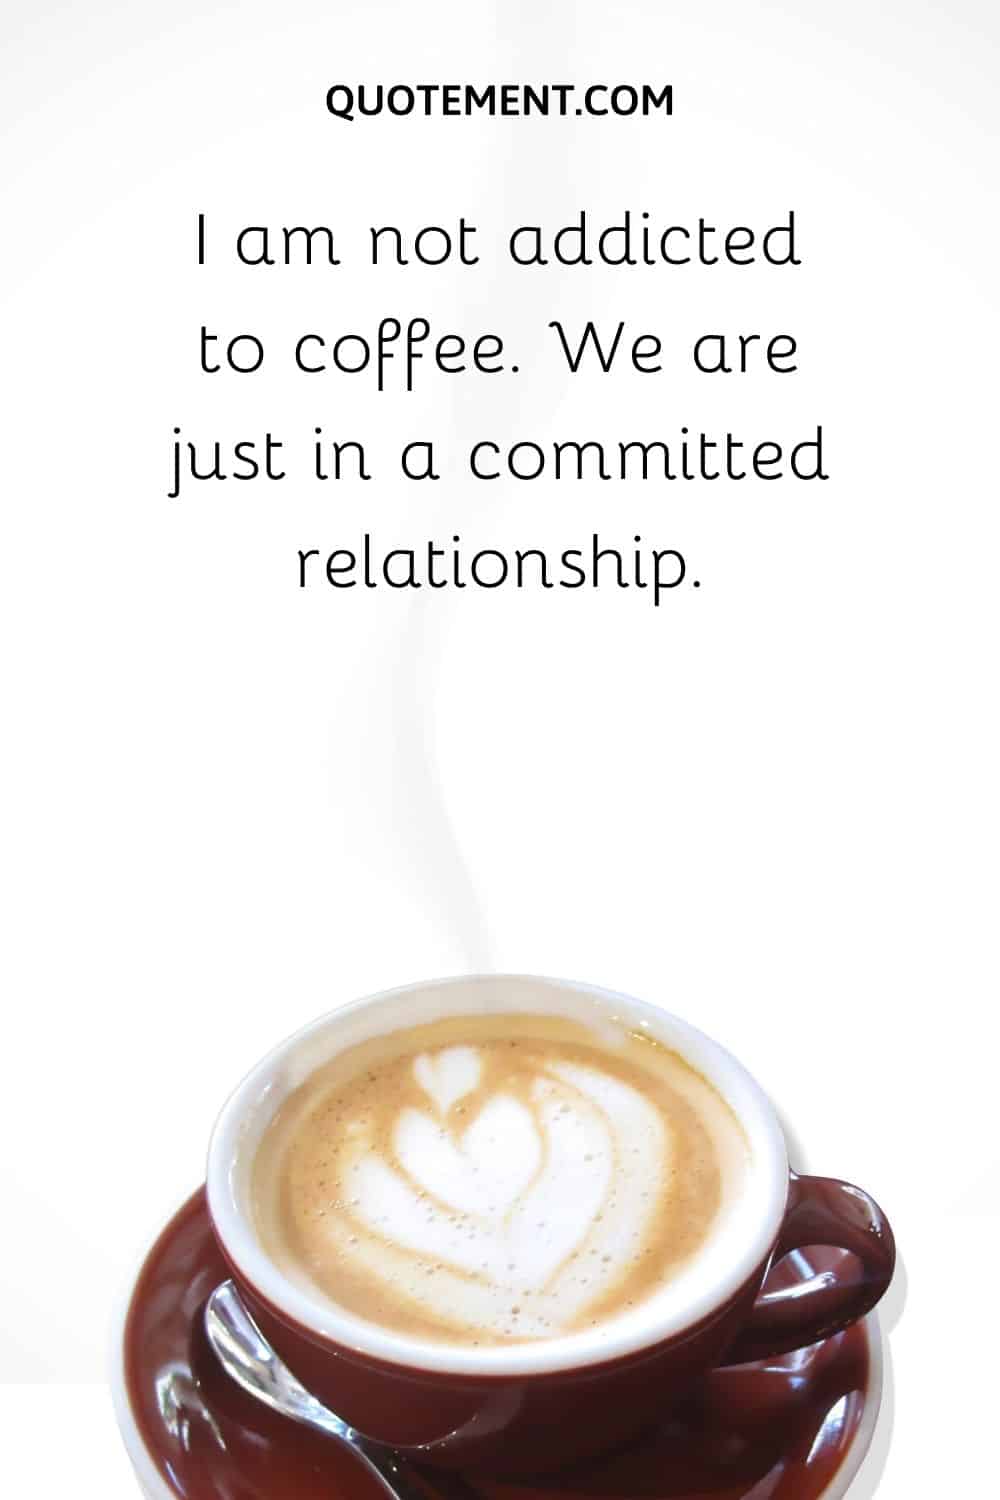 I am not addicted to coffee. We are just in a committed relationship